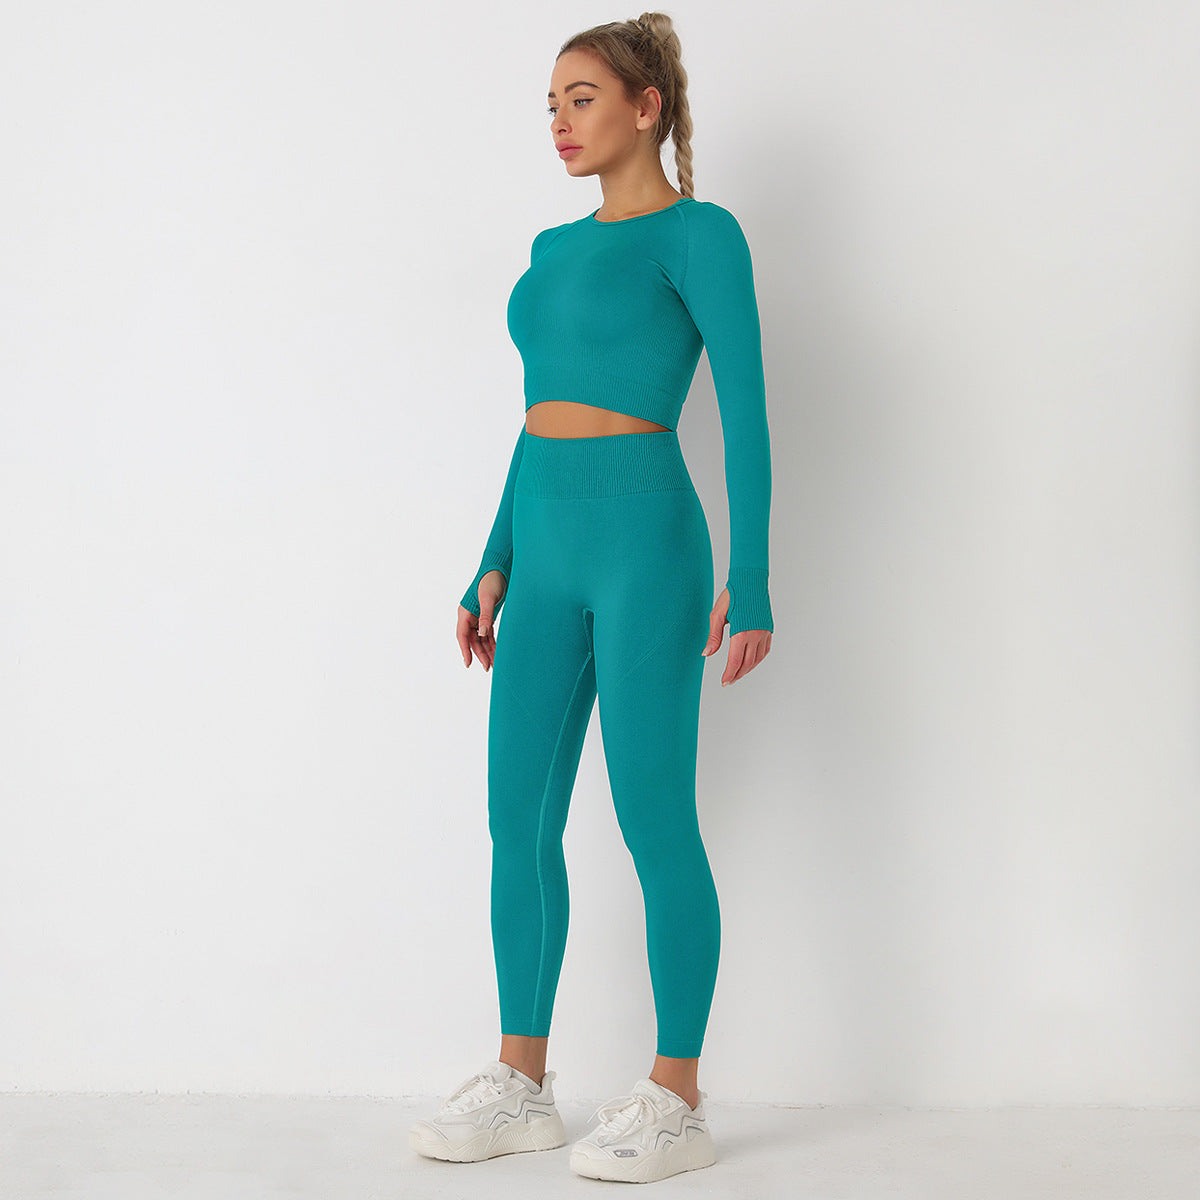 Knitted Solid Color Seamless Long-Sleeved Trousers Yoga Suit Sports Fitness Two-Piece Set